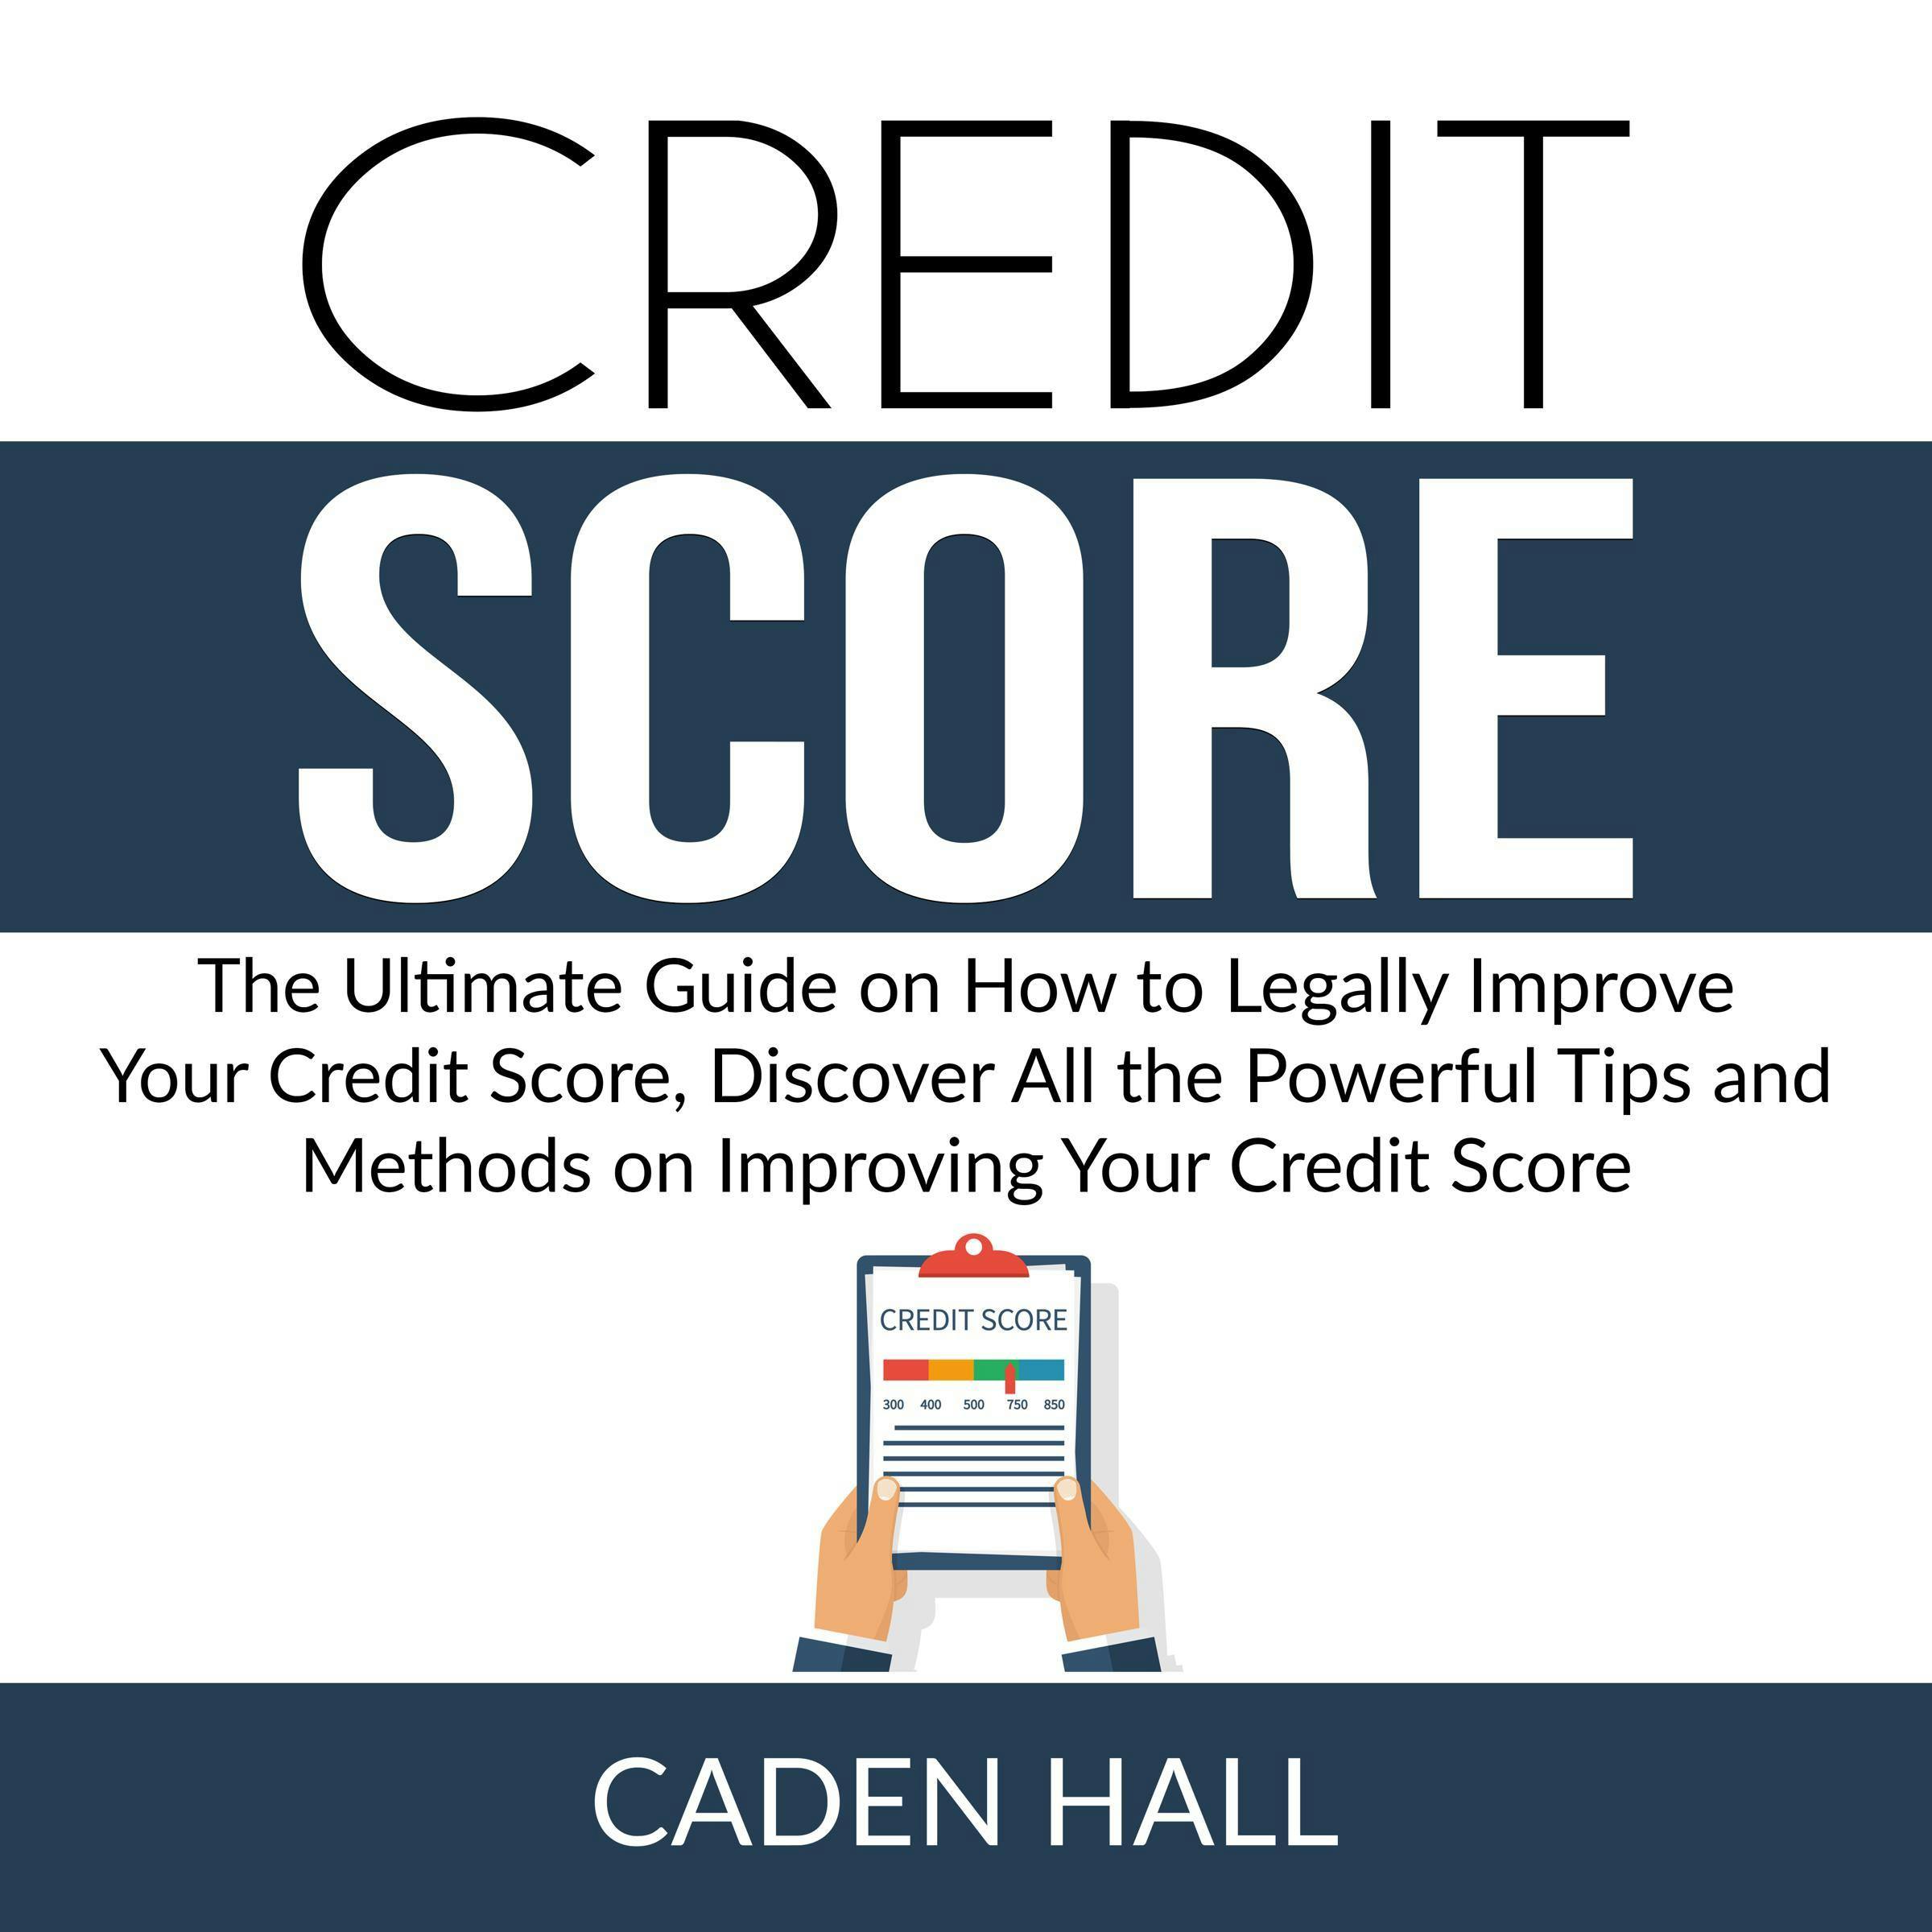 Credit Score: The Ultimate Guide on How to Legally Improve Your Credit Score, Discover All the Powerful Tips and Methods on Improving Your Credit Score - Caden Hall